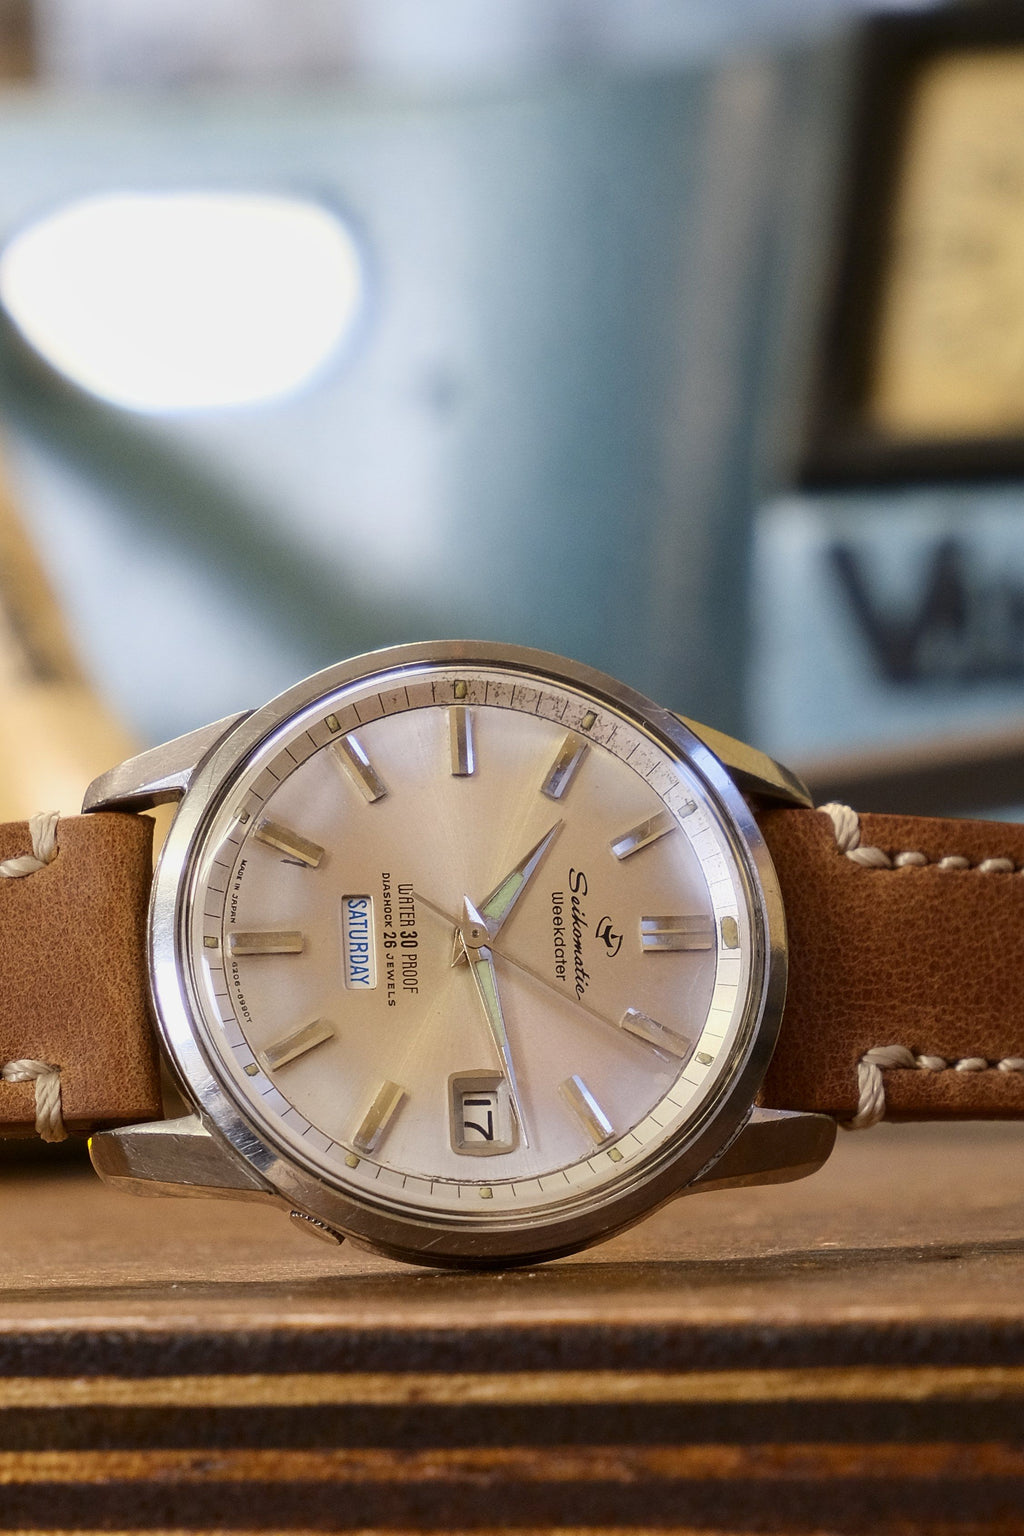 Seiko Weekdater Ref 6206-8990: Why you need one! – Perpetual